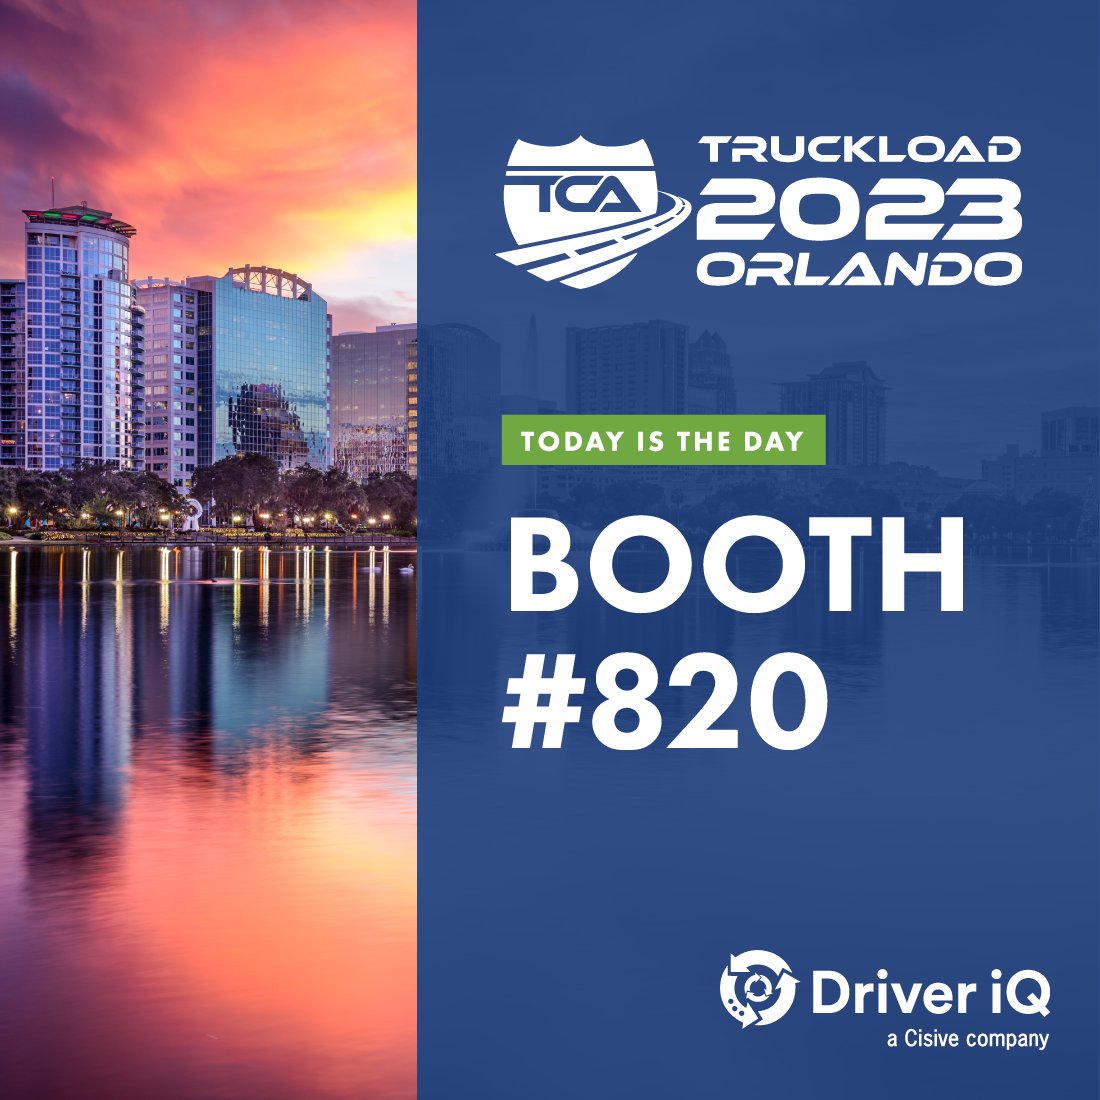 Are you attending the @TCANews #2023TCAConvention? Stop by booth 820 to chat 1:1 with our team and discover how we can help streamline your background screening program! #TruckloadStrong